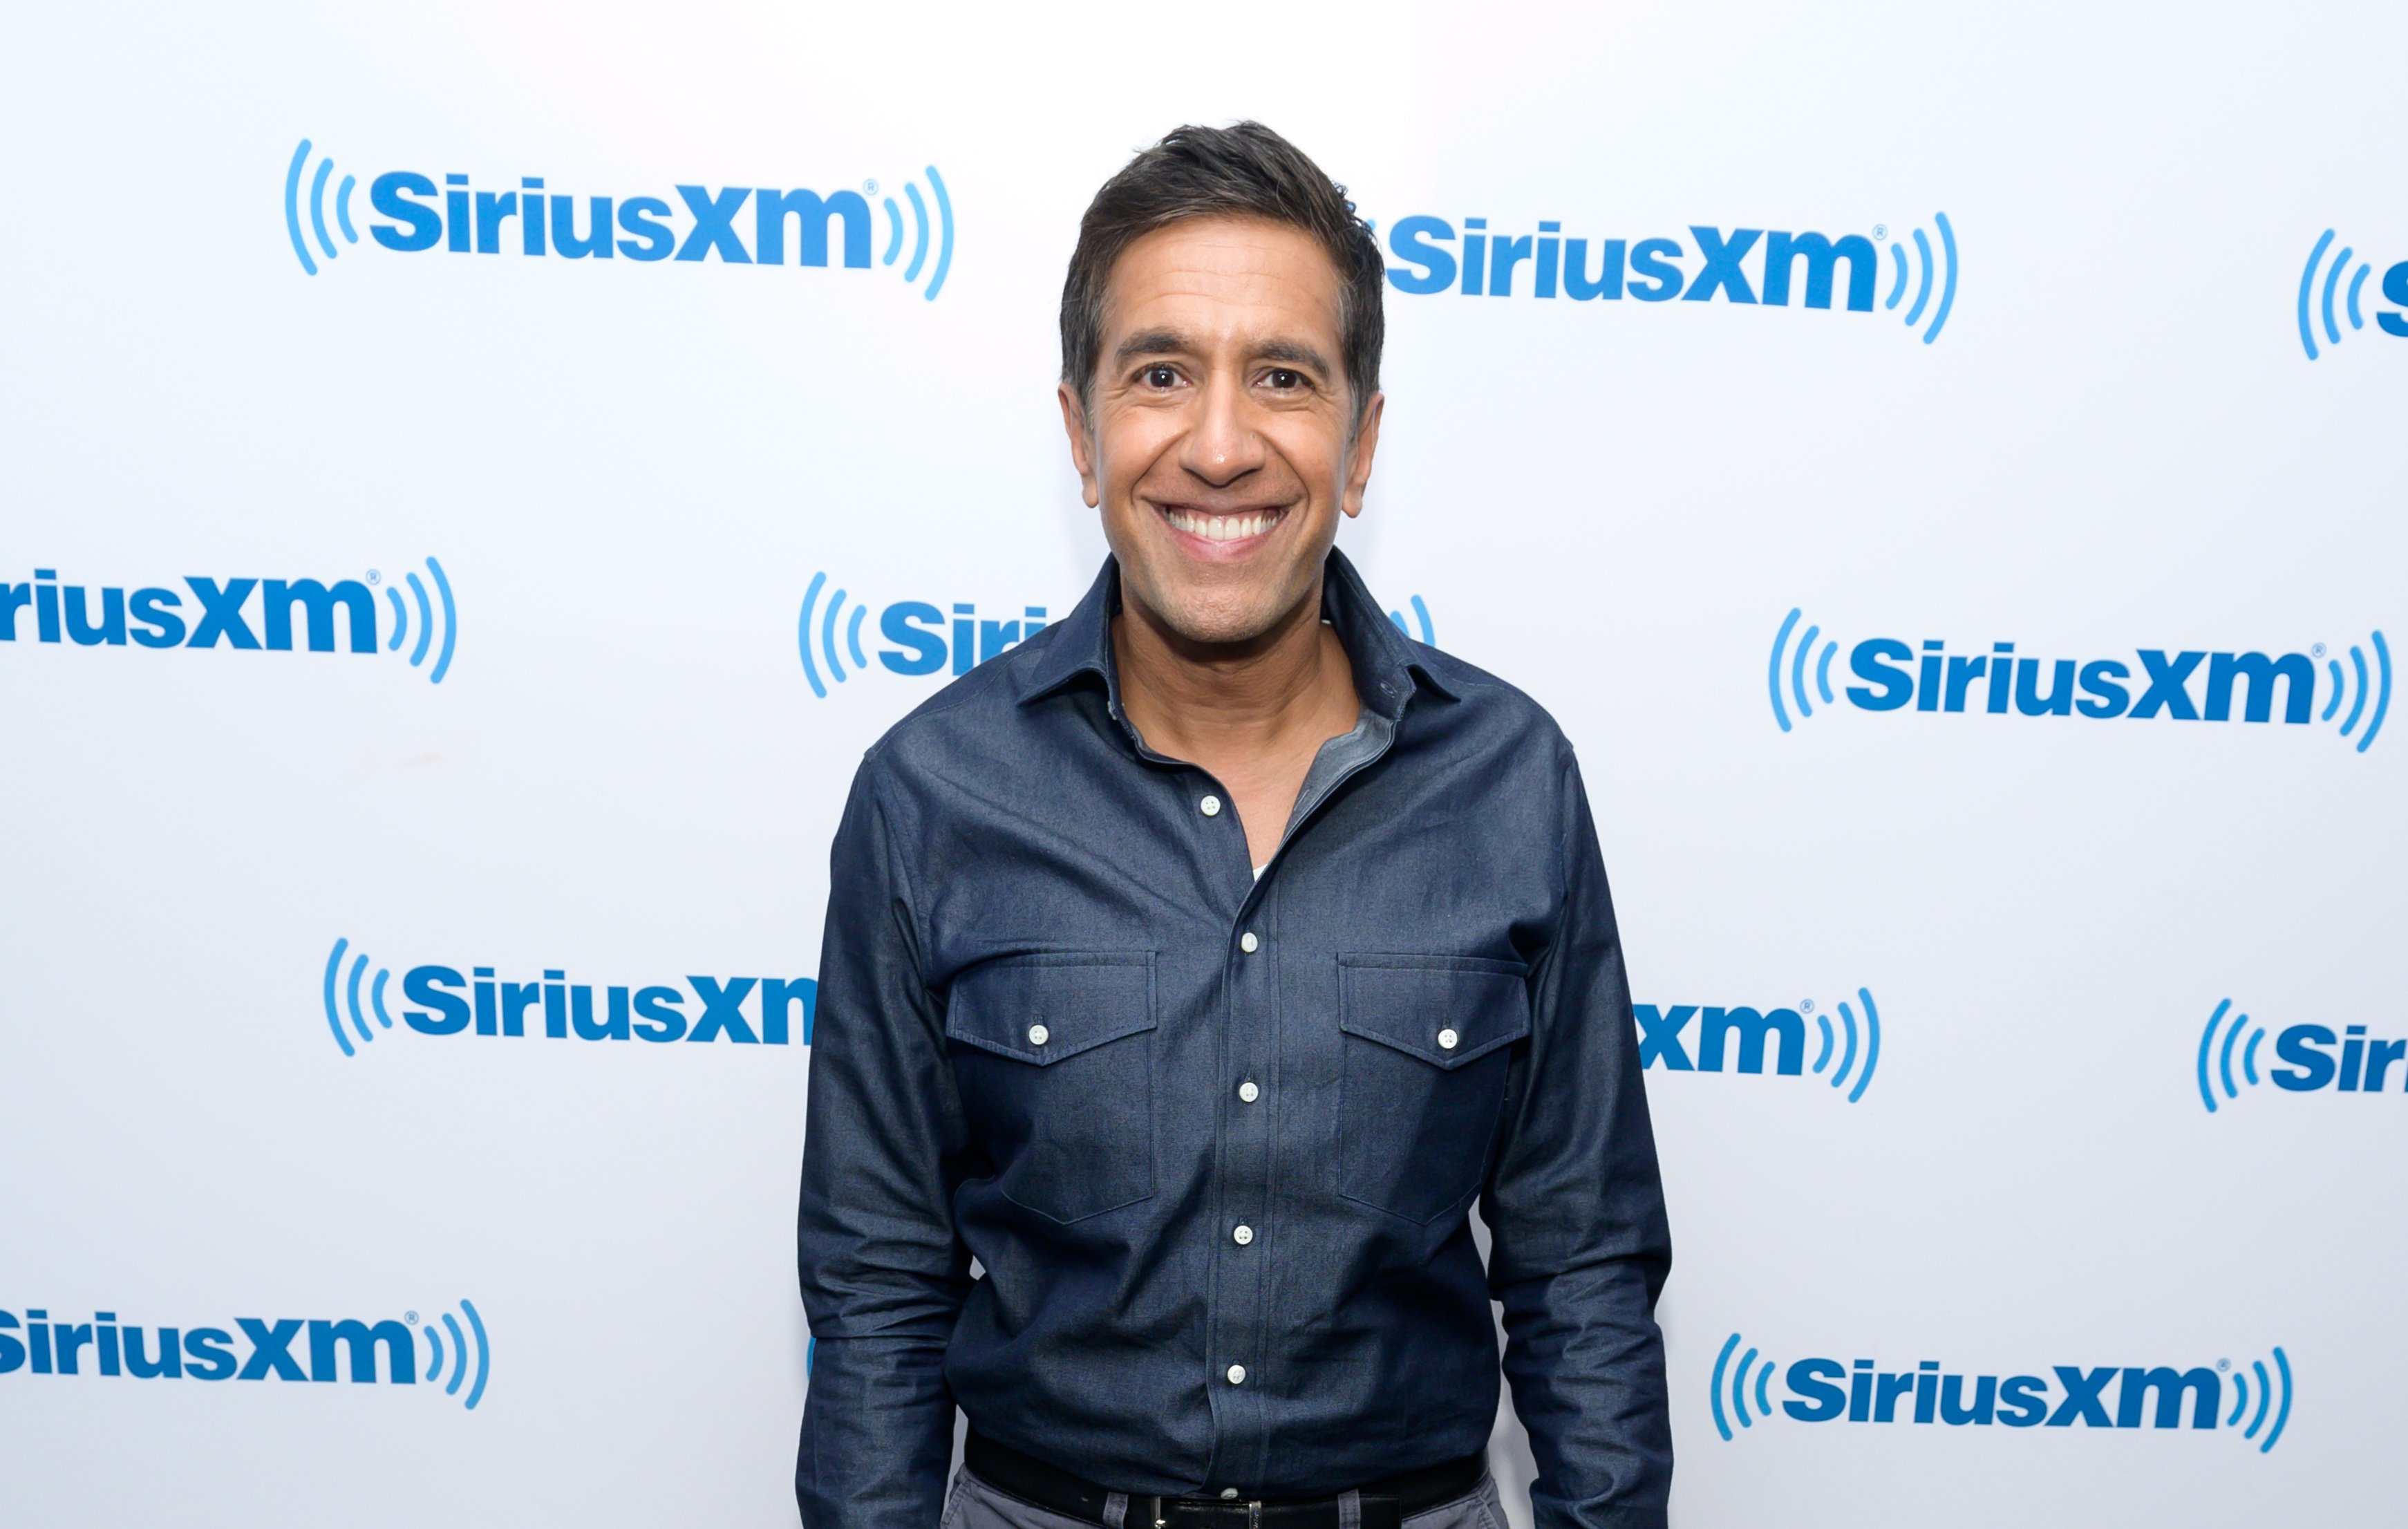 Dr. Sanjay Gupta, CNN's Chief Medical Correspondent smiles for the camera as he appears at a SiriusXM event.